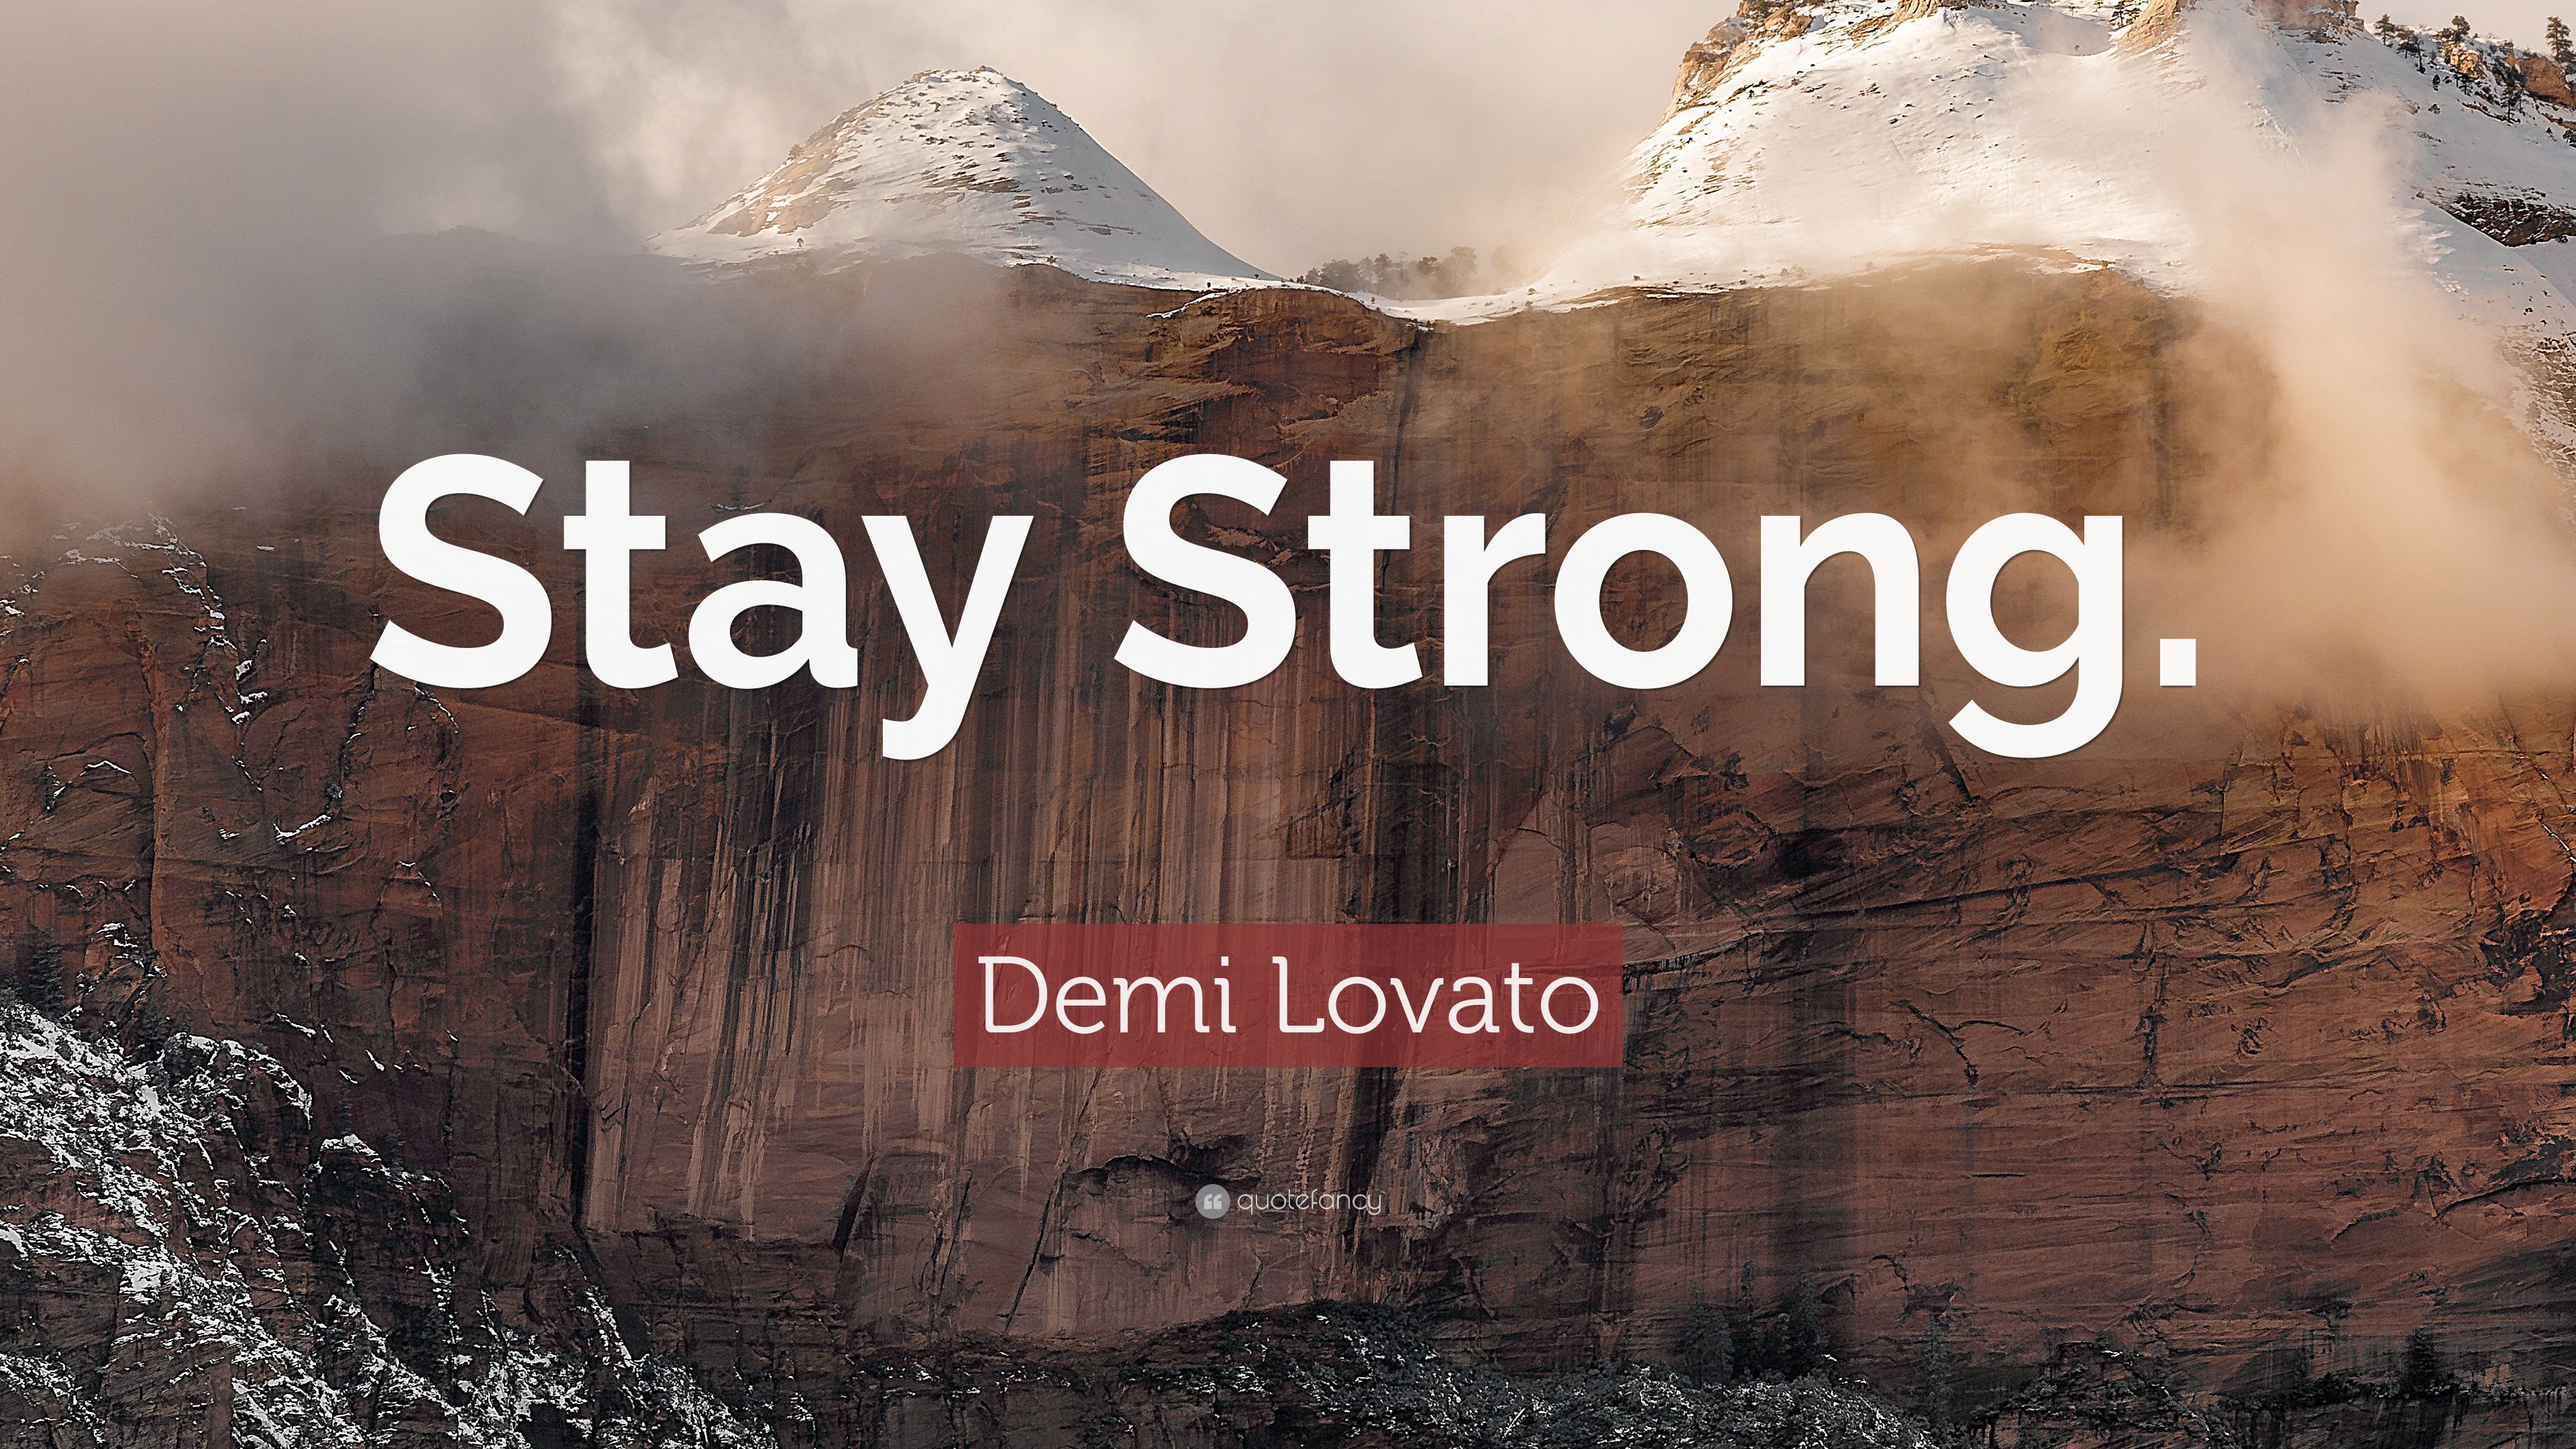 Demi Lovato Quote: “Stay Strong.” (7 wallpaper)